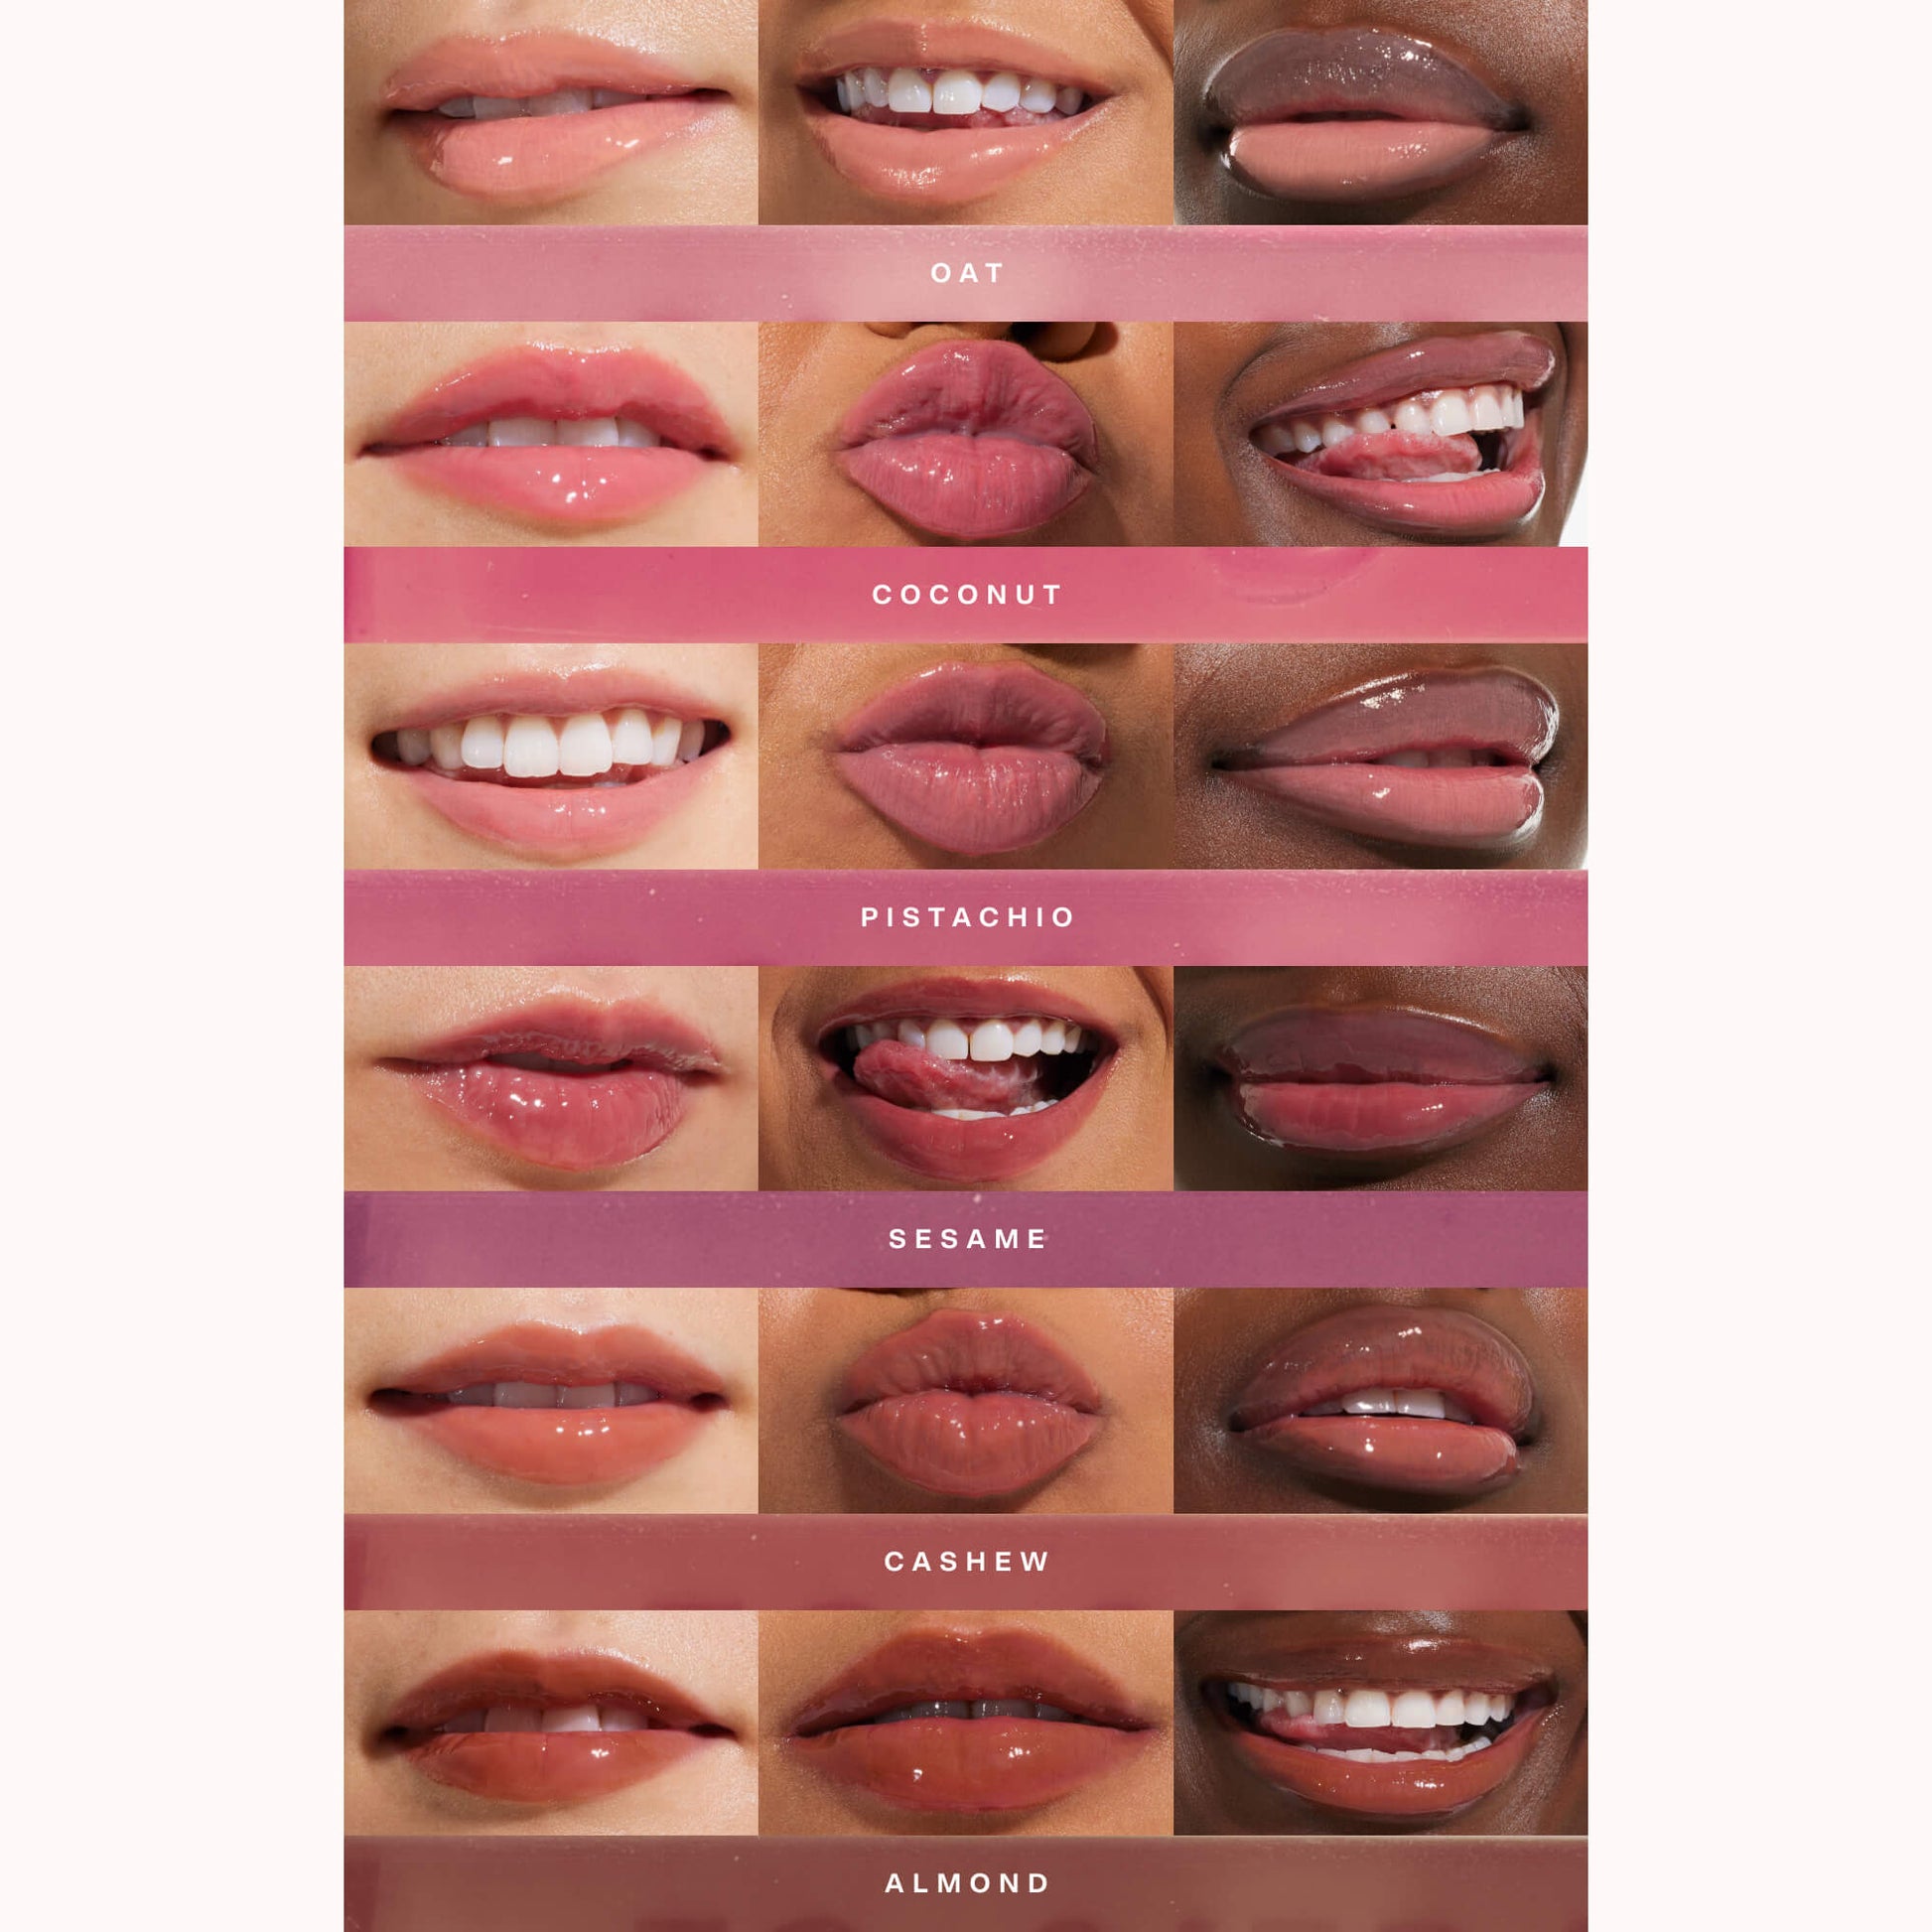 [Shared: All shades of the Tower 28 Beauty ShineOn Milky Lip Jelly applied on three different skin tones